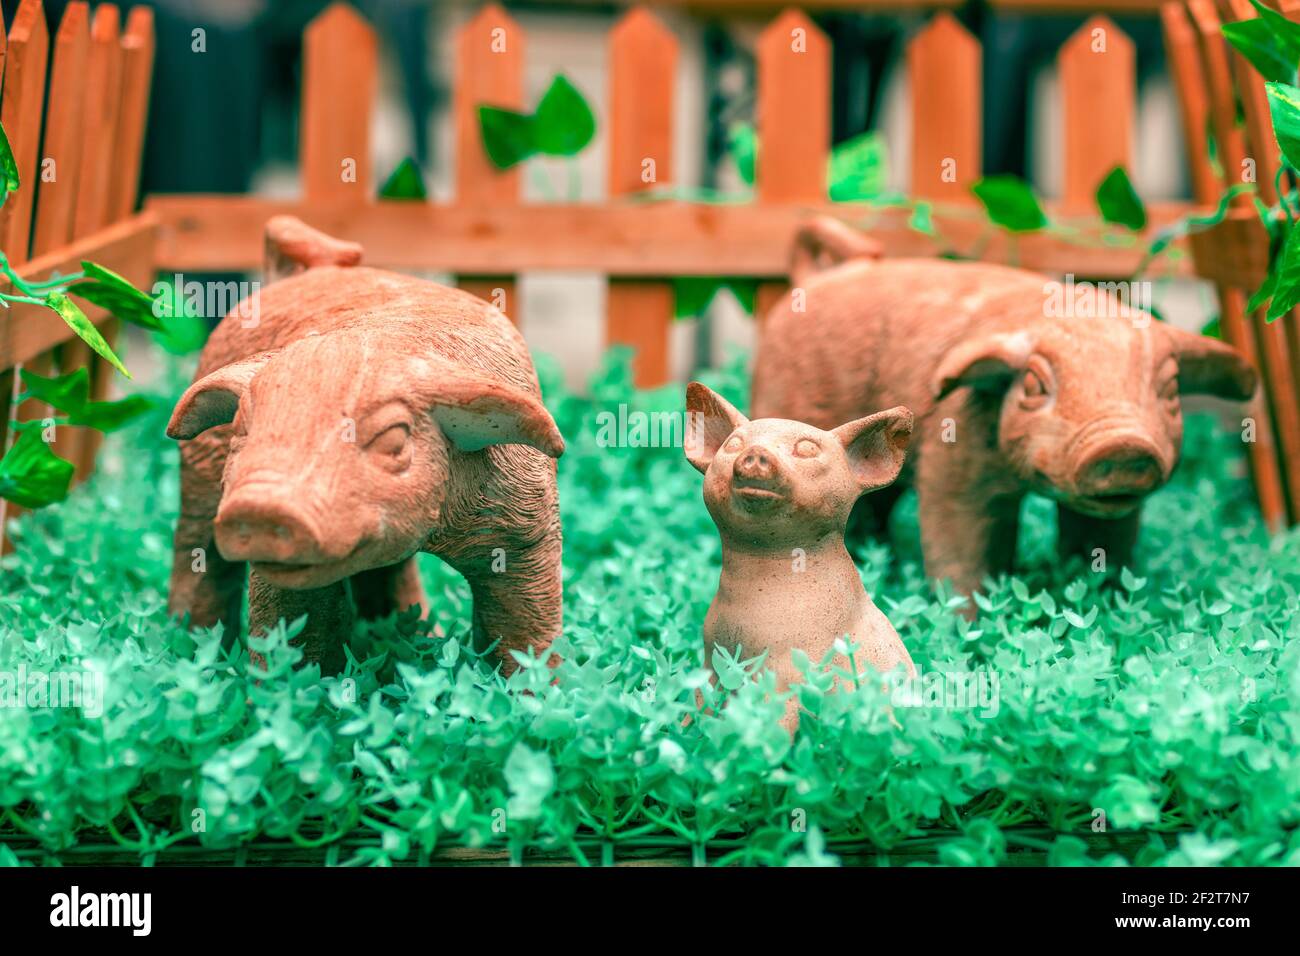 Symbol of the new year 2019. Newborn ceramic toy pig surrounded by his mom and dad in a tay animal pen. Chinese horoscope year of the pig. 2019 new ye Stock Photo